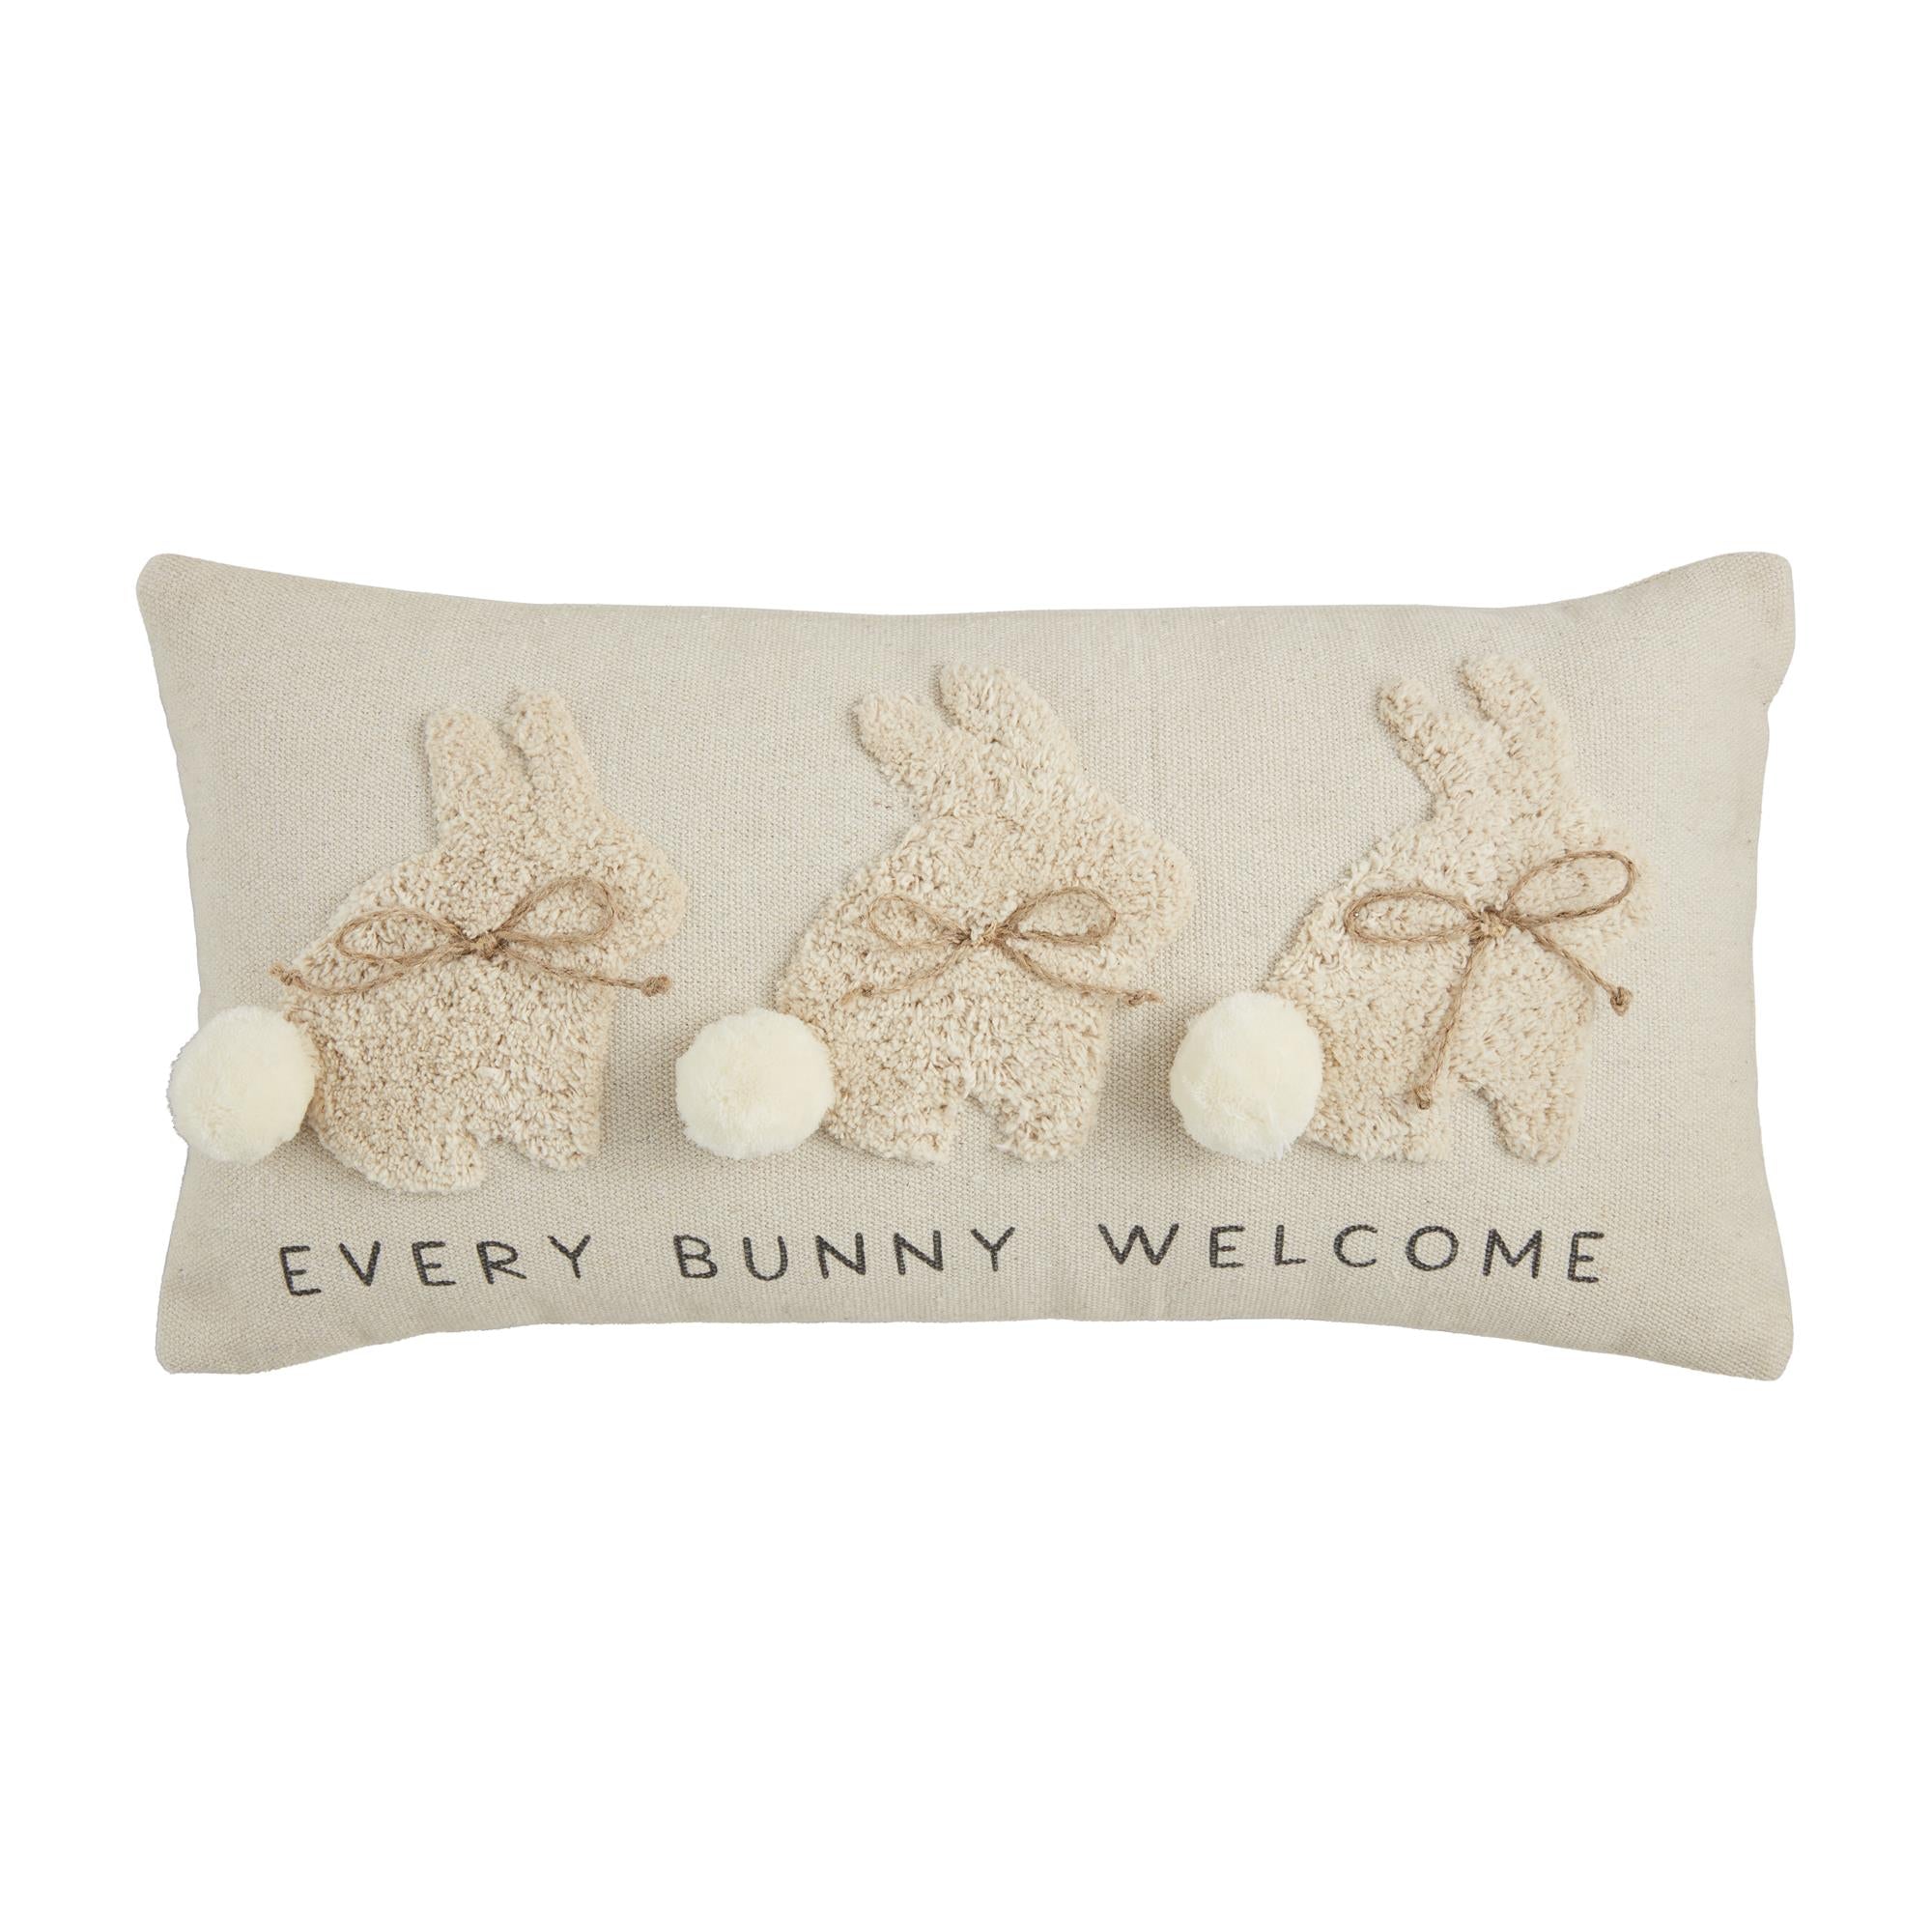 Bunny Tufted Pillow